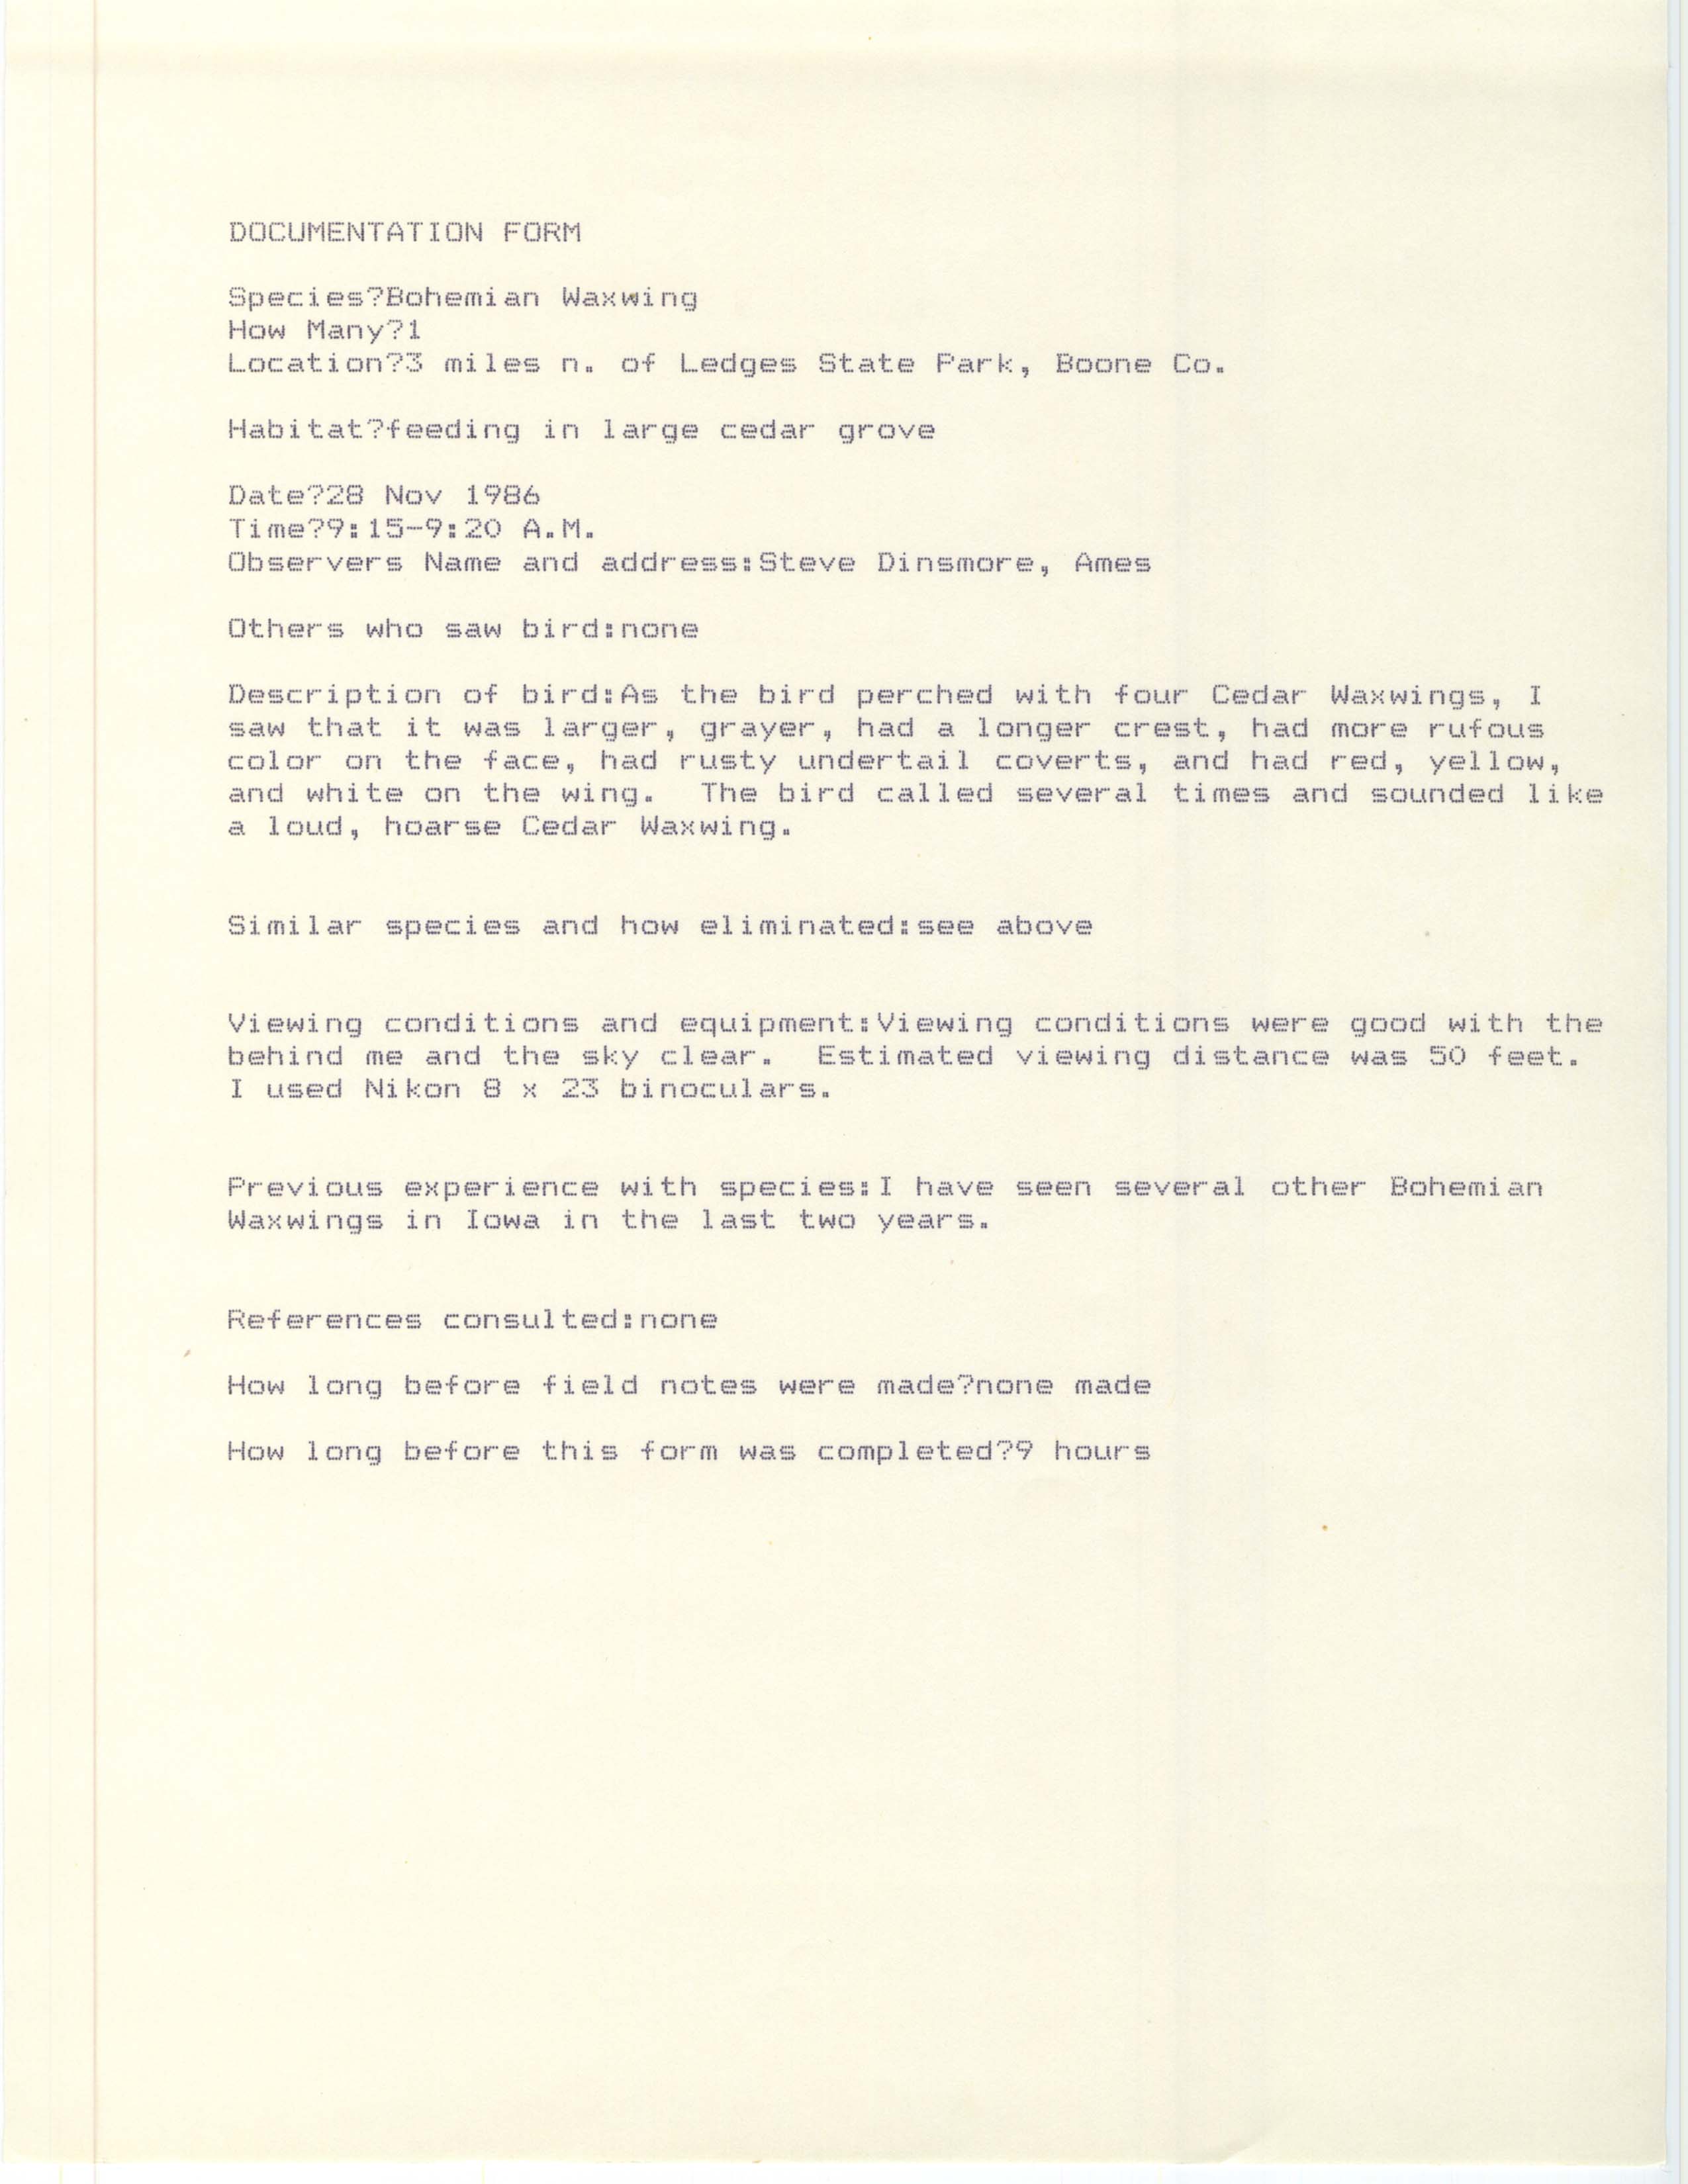 Rare bird documentation form for Bohemian Waxwing north of Ledges State Park, 1986